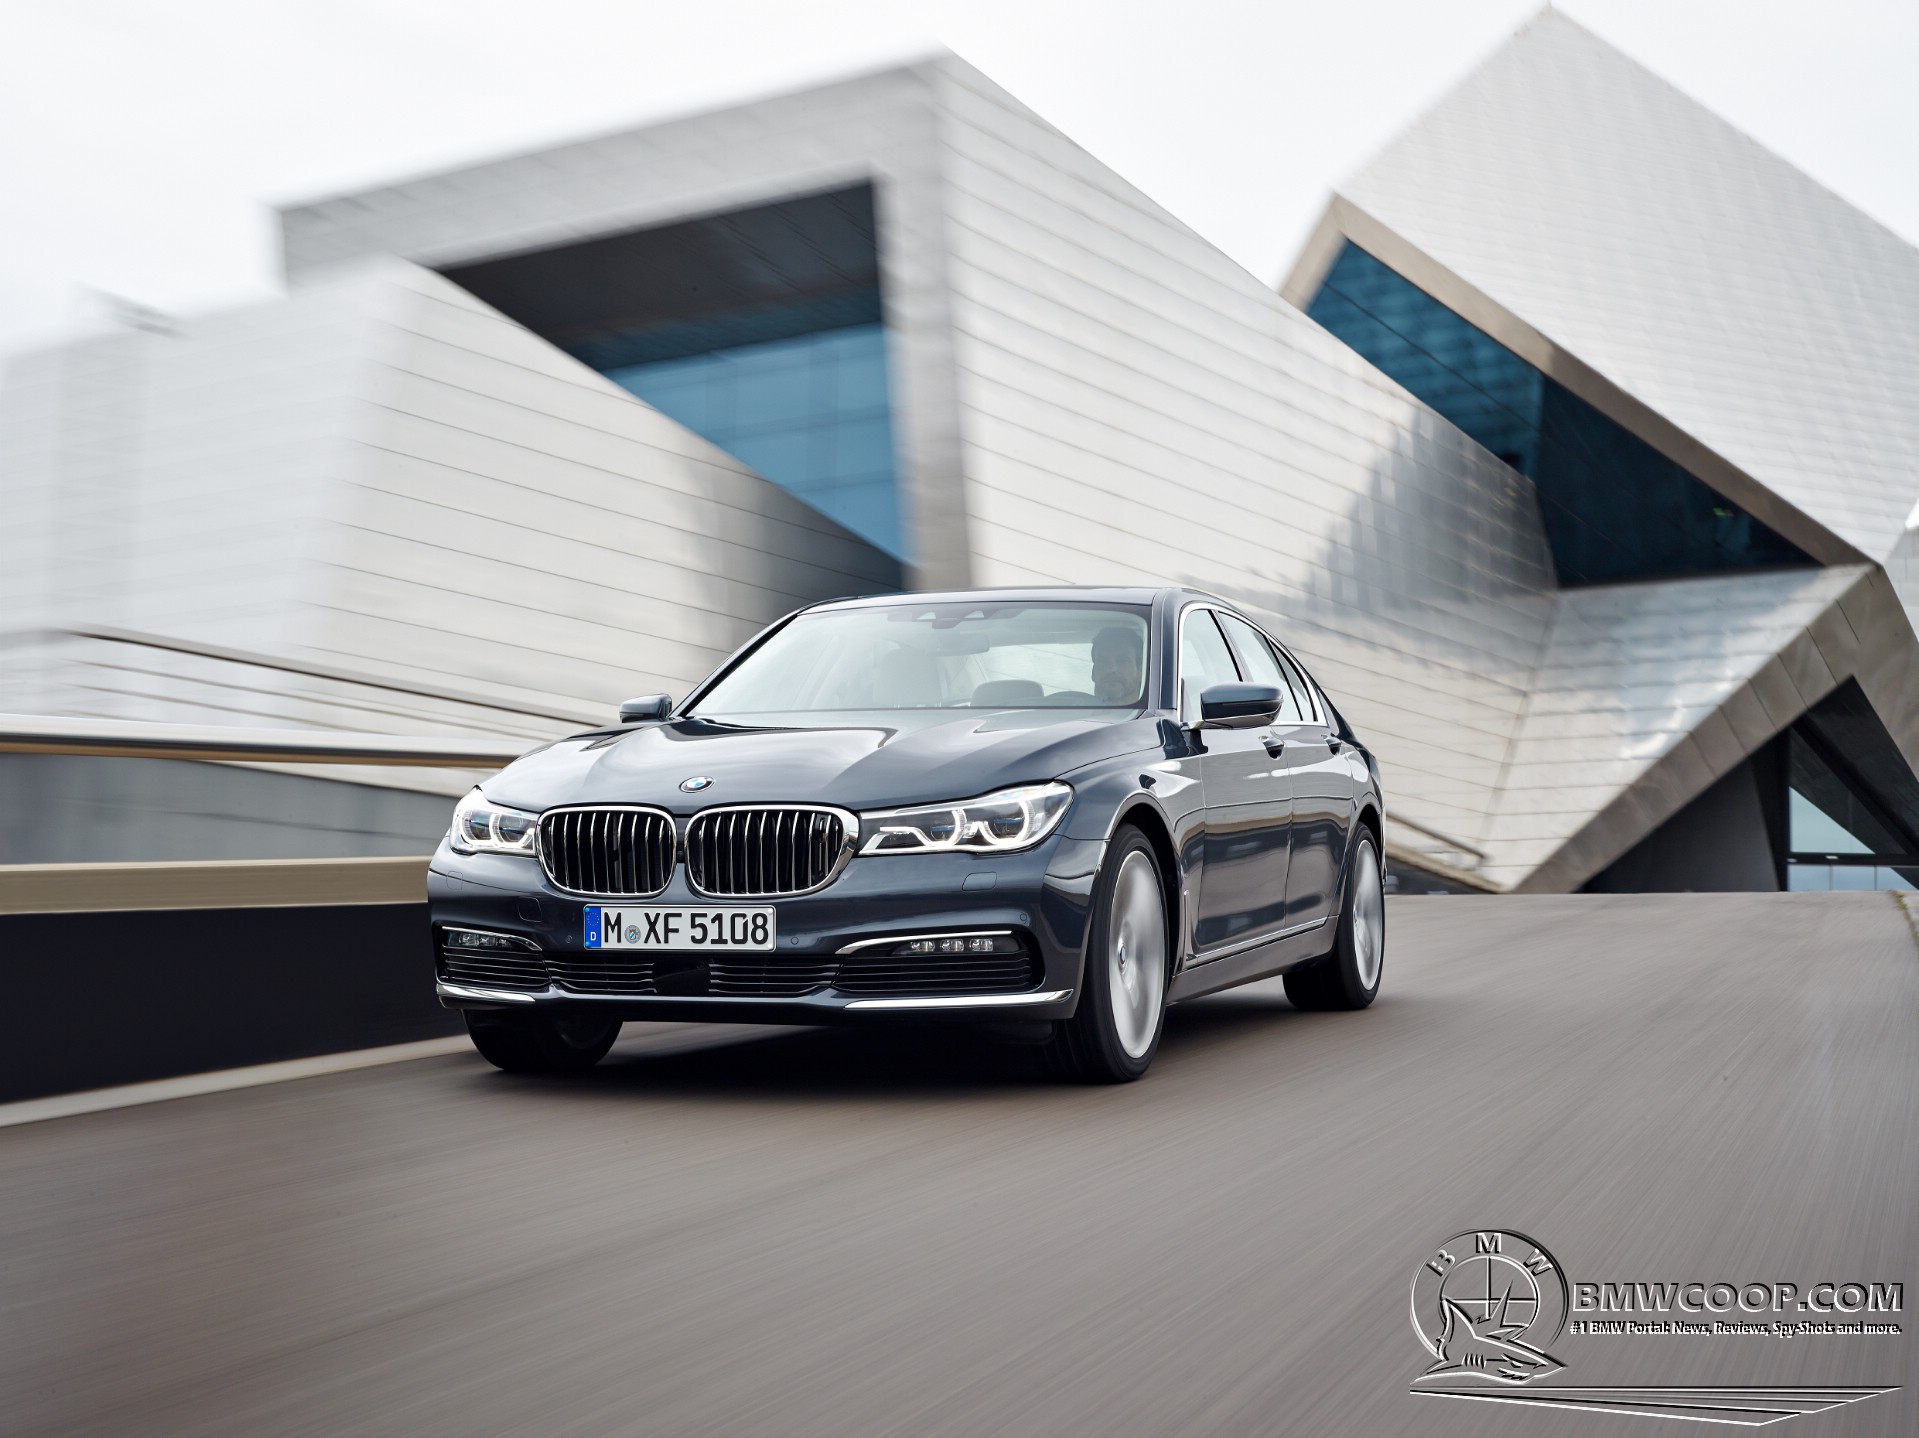 Video Showcases BMW`s Chief Design, Karim Habib, Explaining the Styling and Technology of 2016 BMW 7-Series